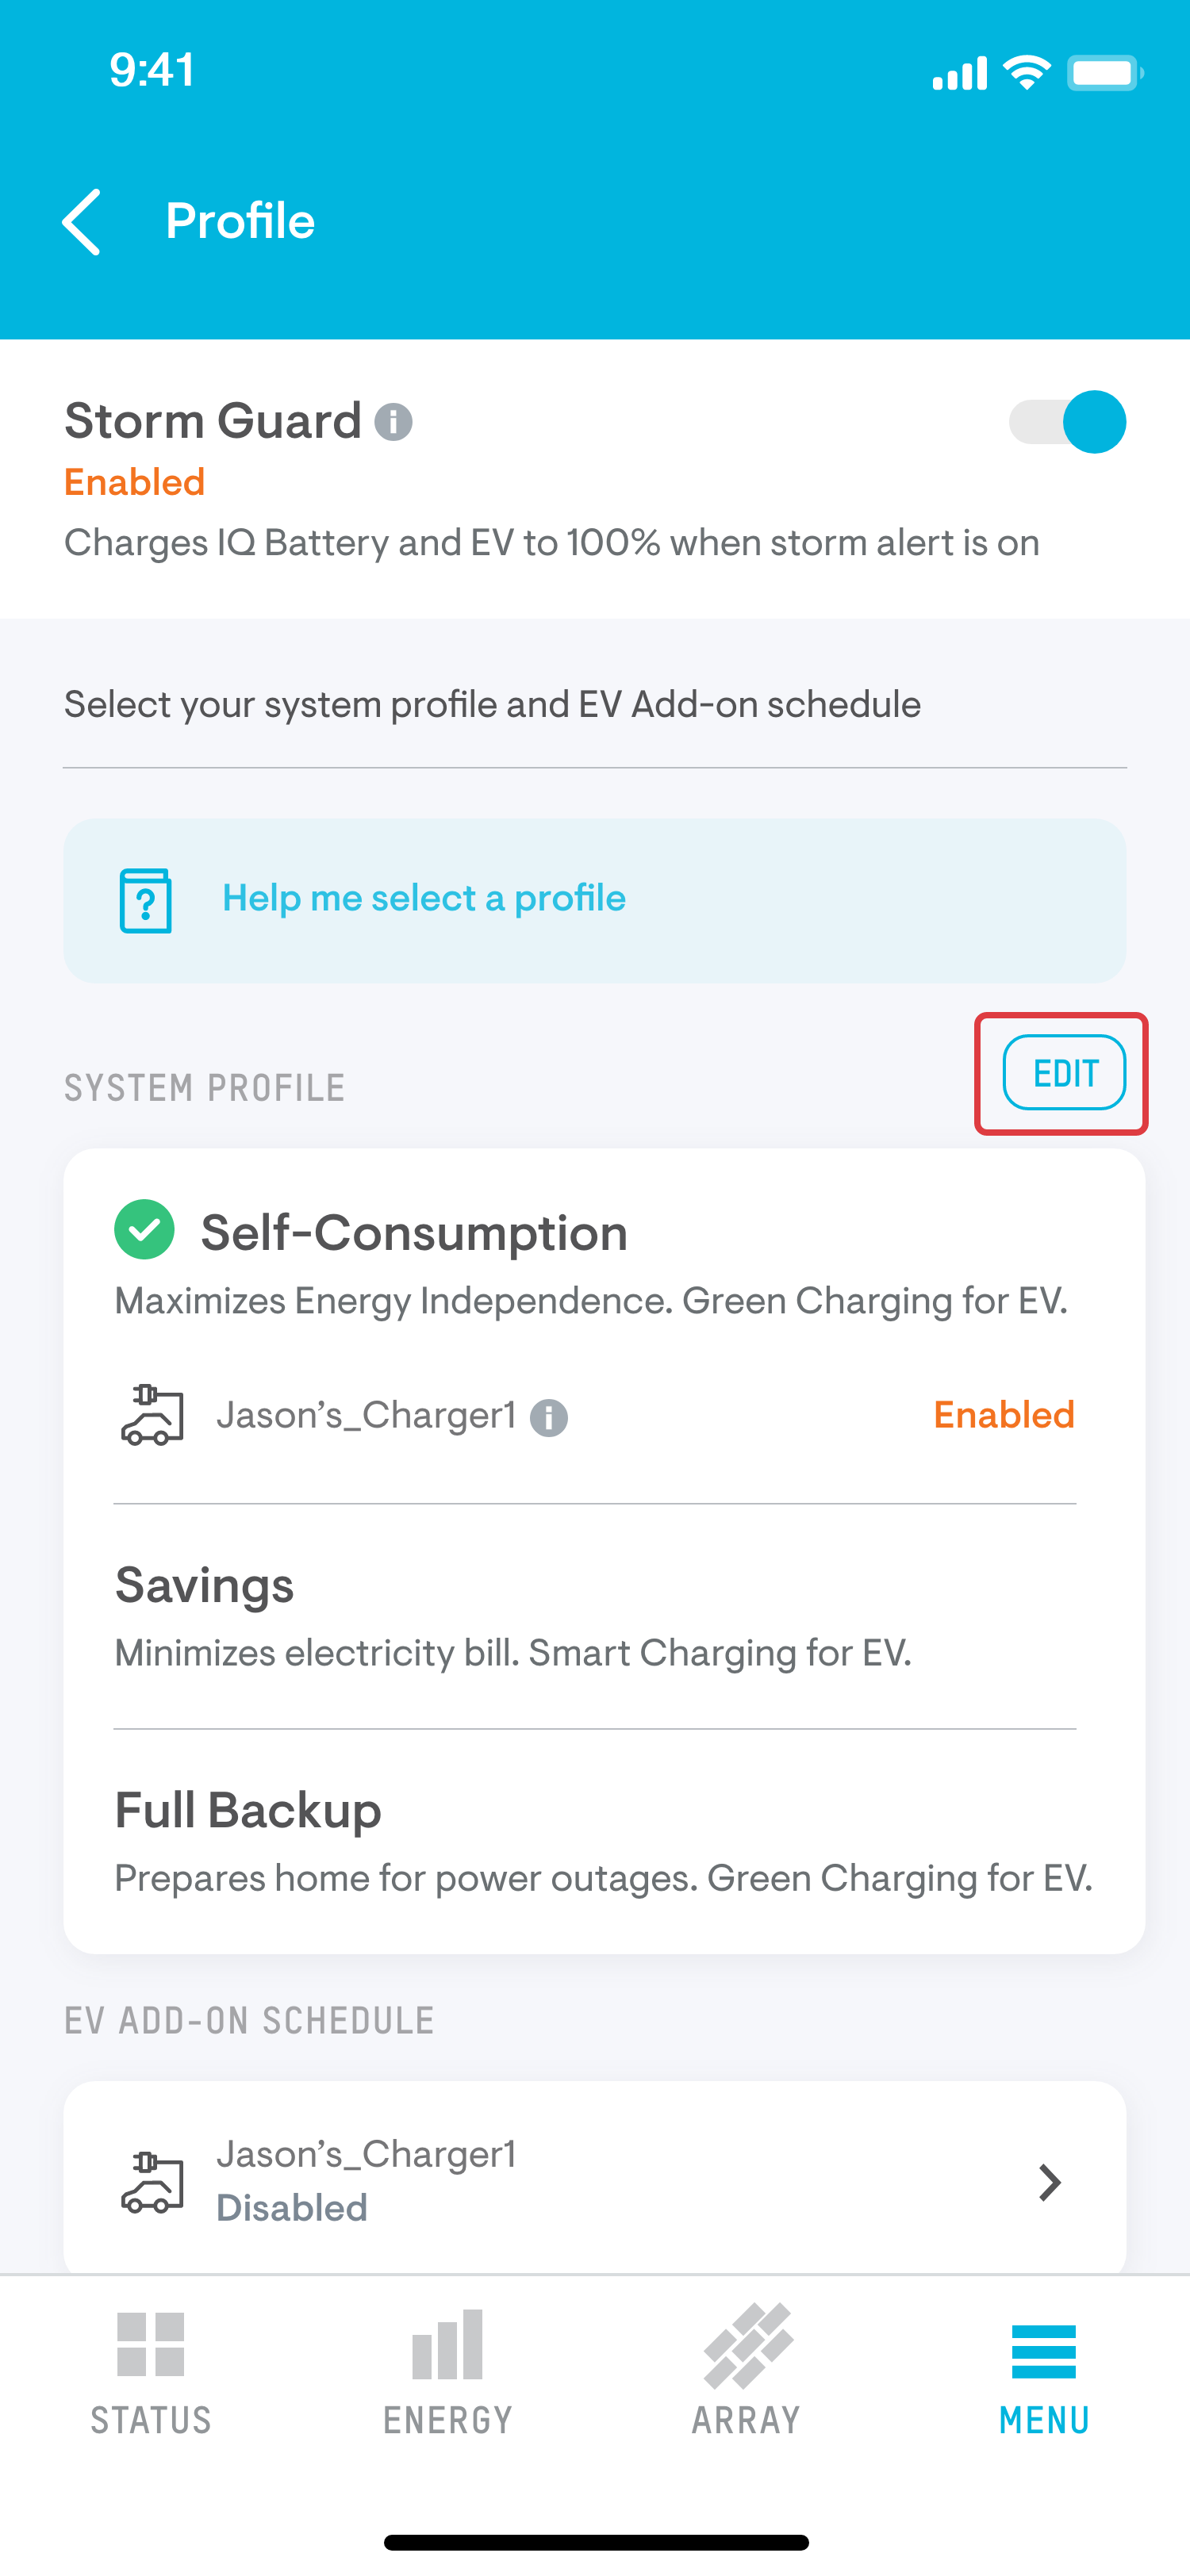 Profile view of the Enphase Energy App